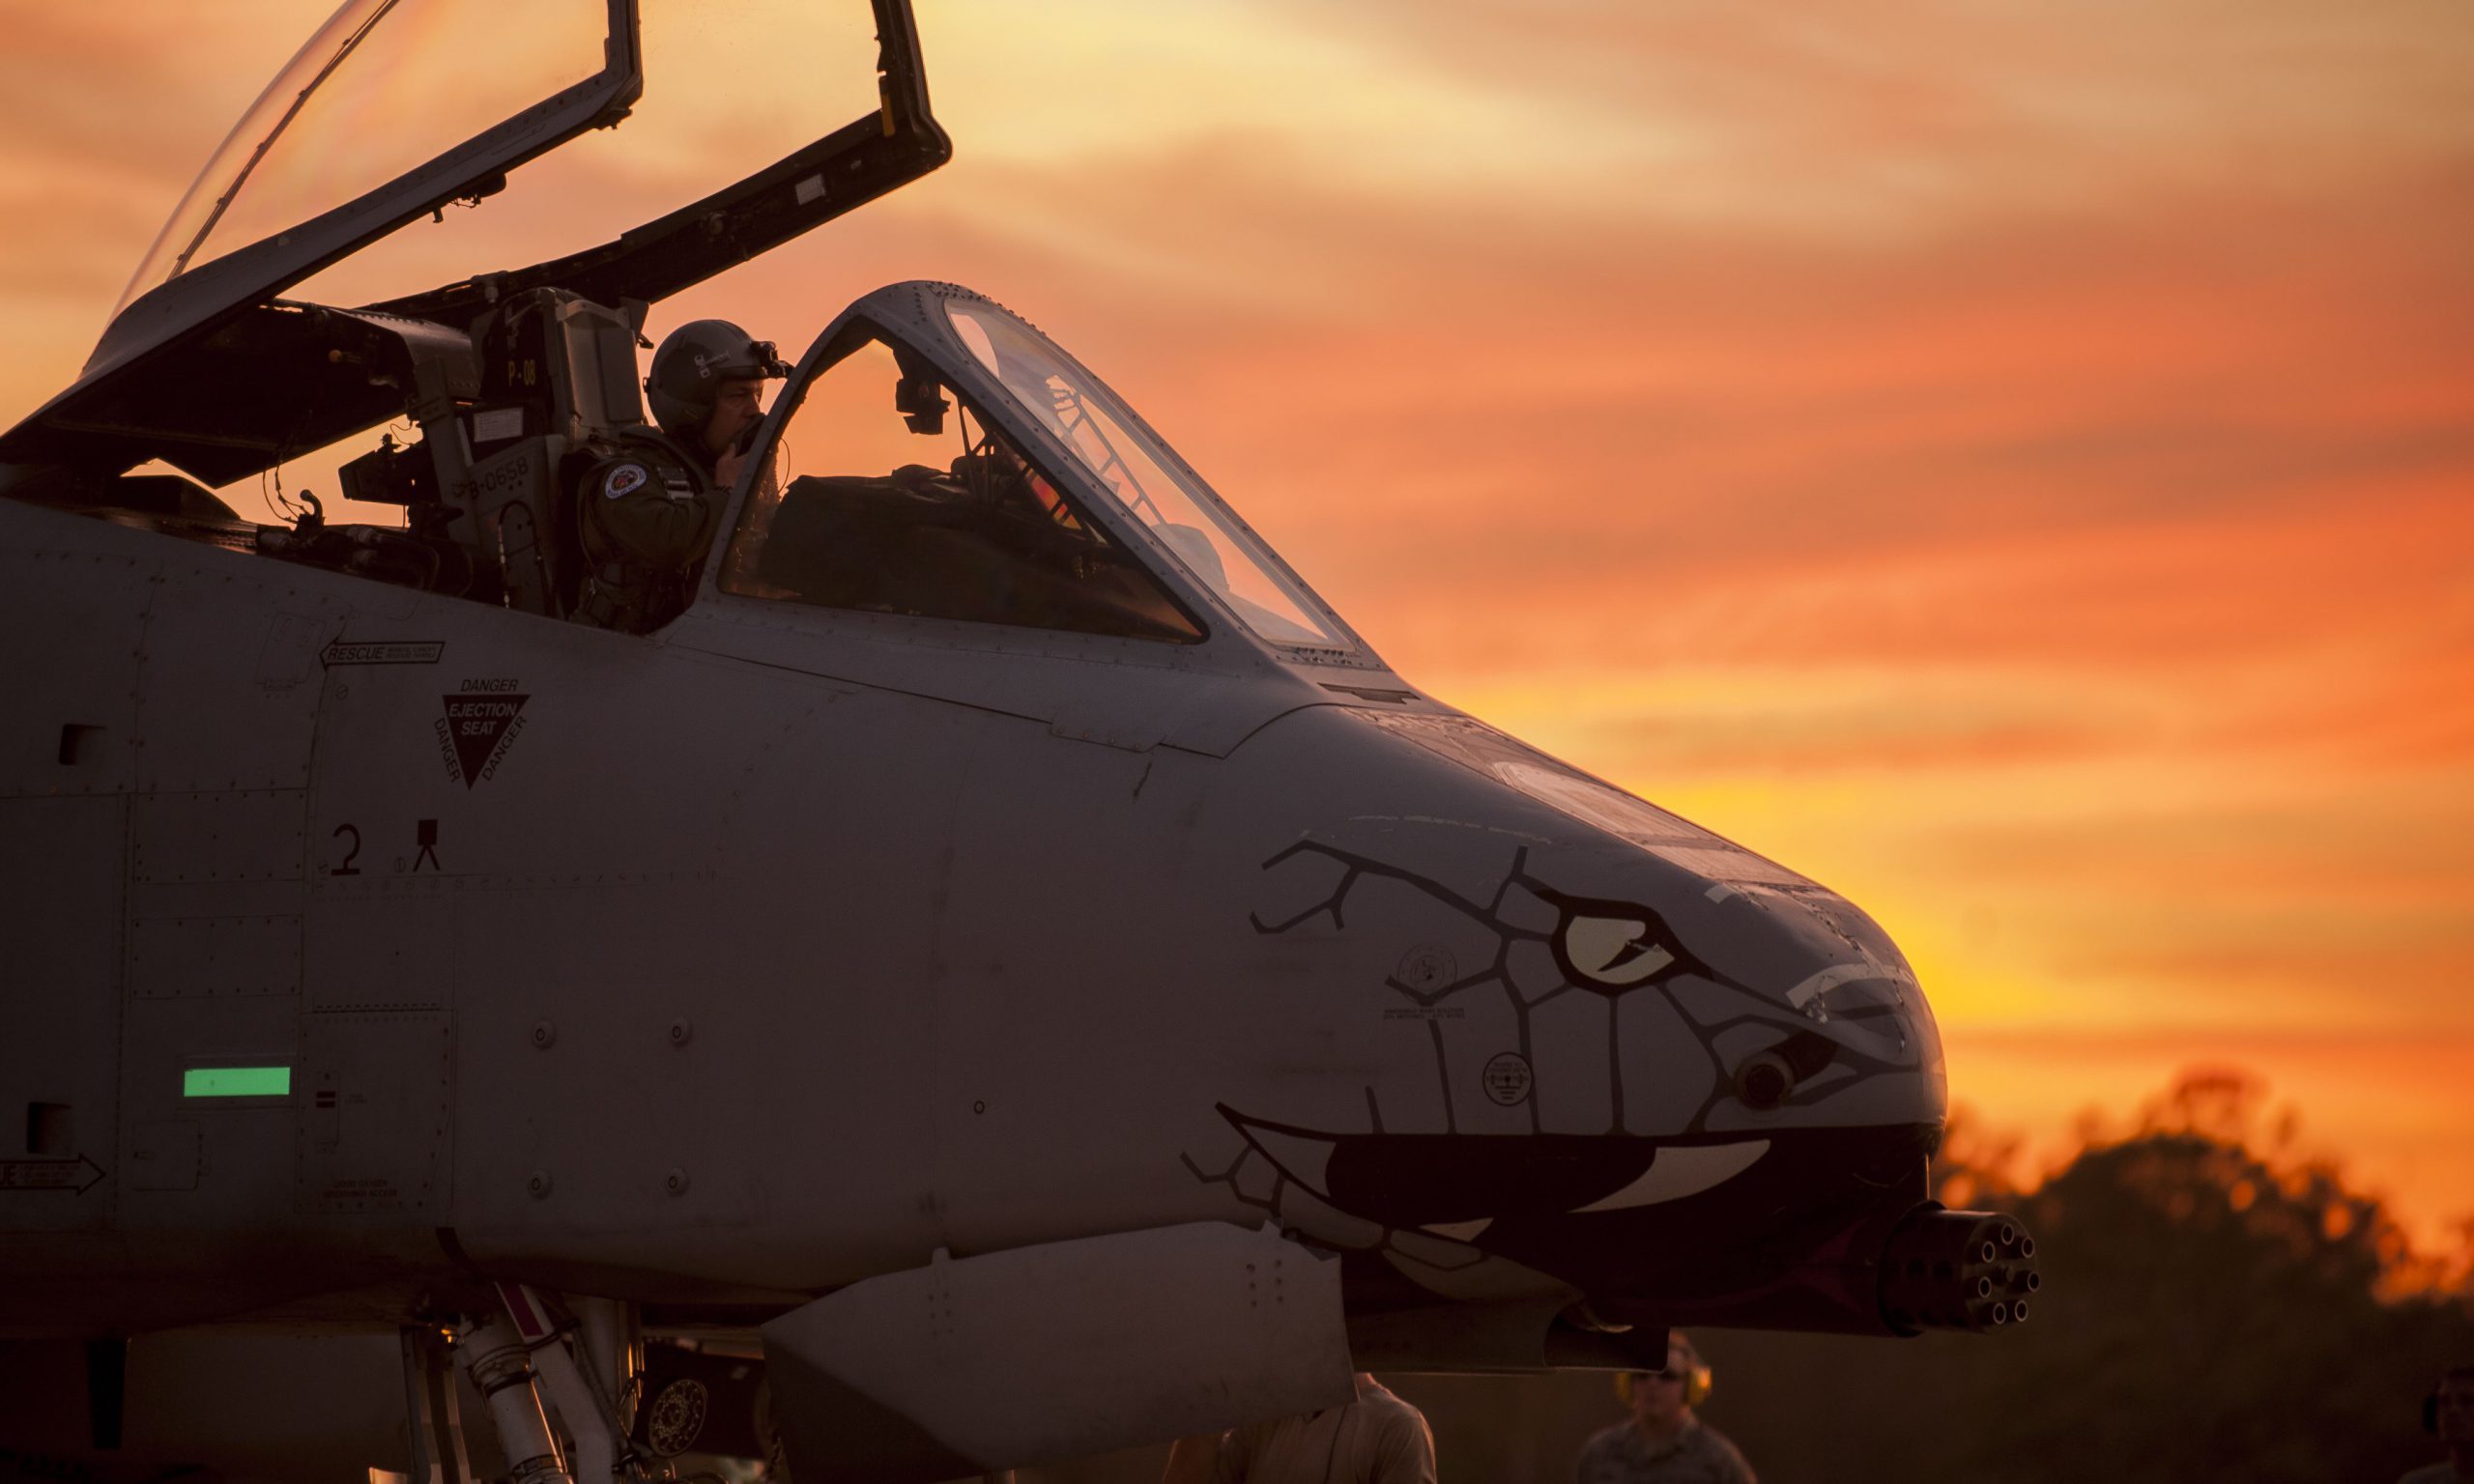 An A-10C Thunderbolt II pilot from the 163rd Fighter Squadron, and crew chiefs from the 122nd Fighter Wing, prepare for takeoff during Operation Guardian Blitz at MacDill Air Force Base, Fla., Jan. 23, 2018. Guardian Blitz is a two-week joint exercise to improve service interoperability for combat search and rescue and close air support. Indiana Air National Guard photo by Staff Sgt. William Hopper. -